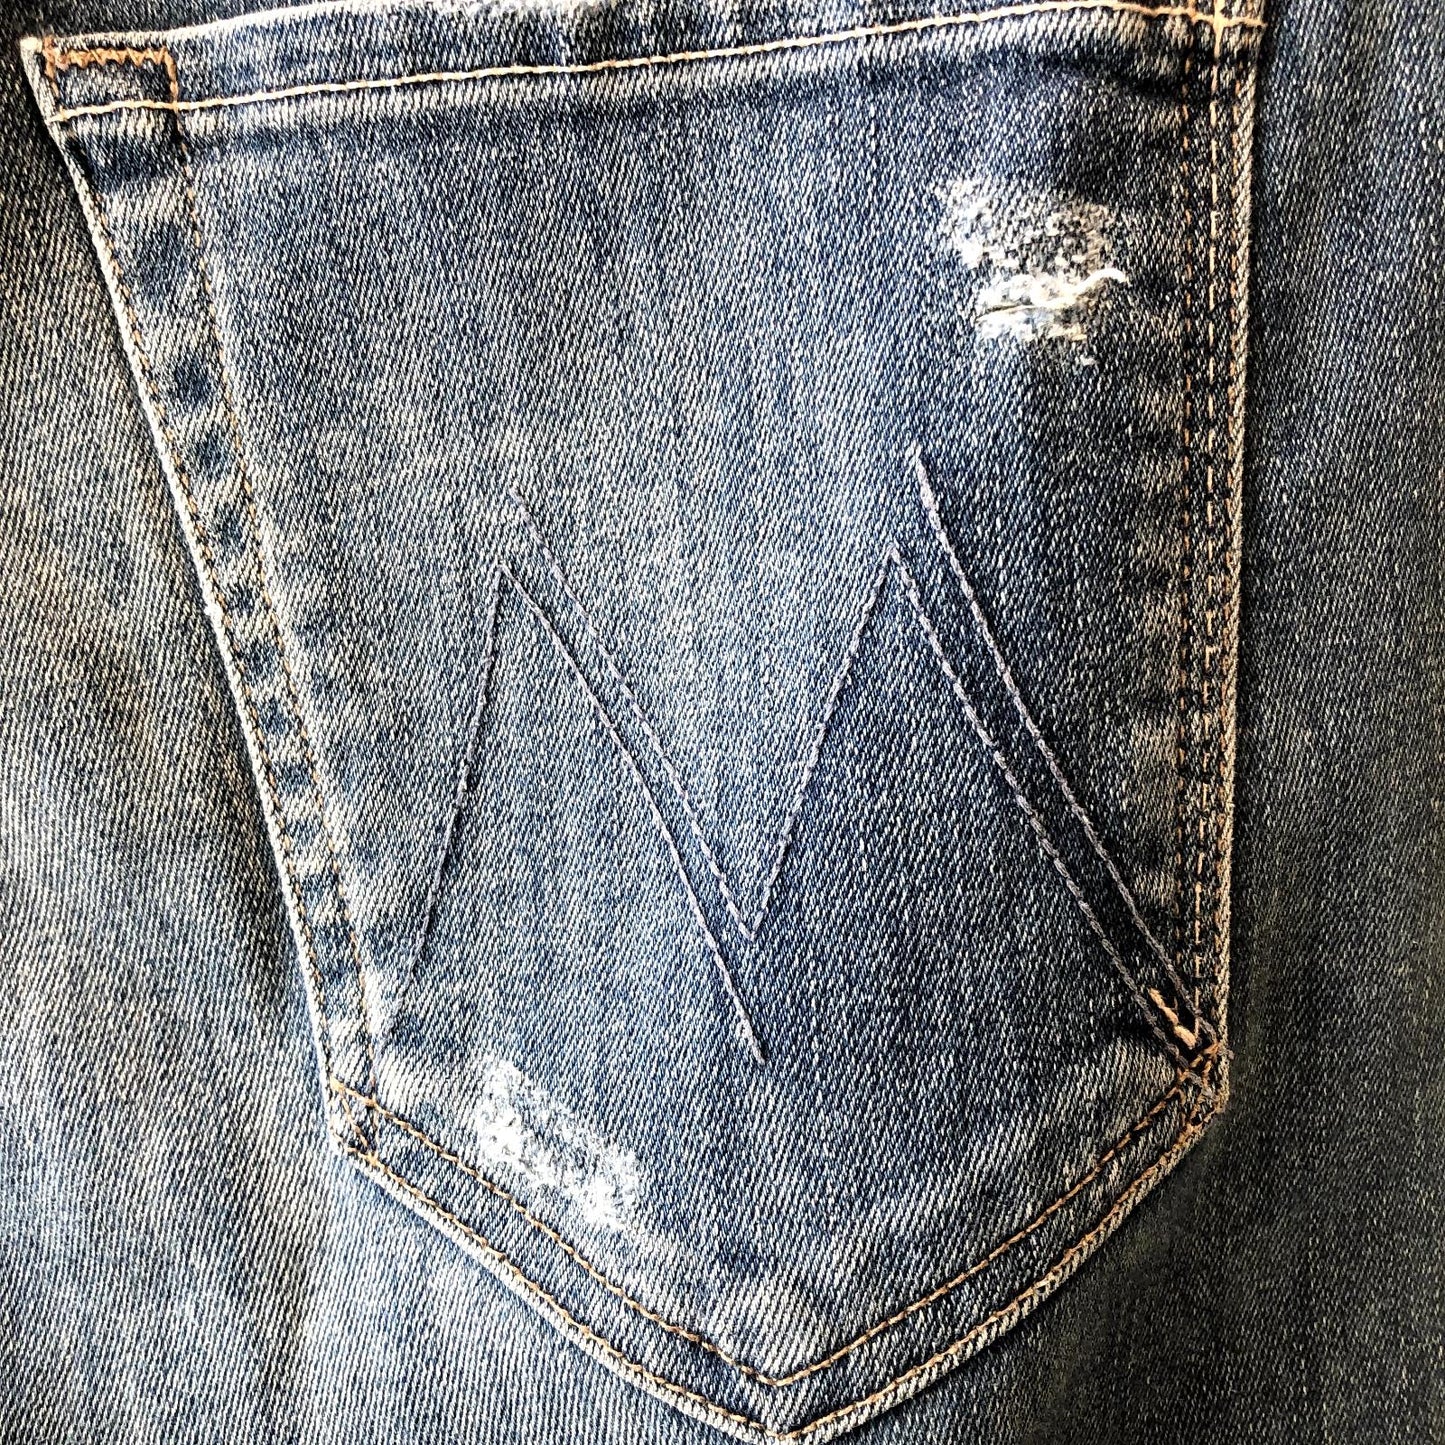 30 - Mother High Waisted Looker in High Five Wash Distressed Jeans 0206BS